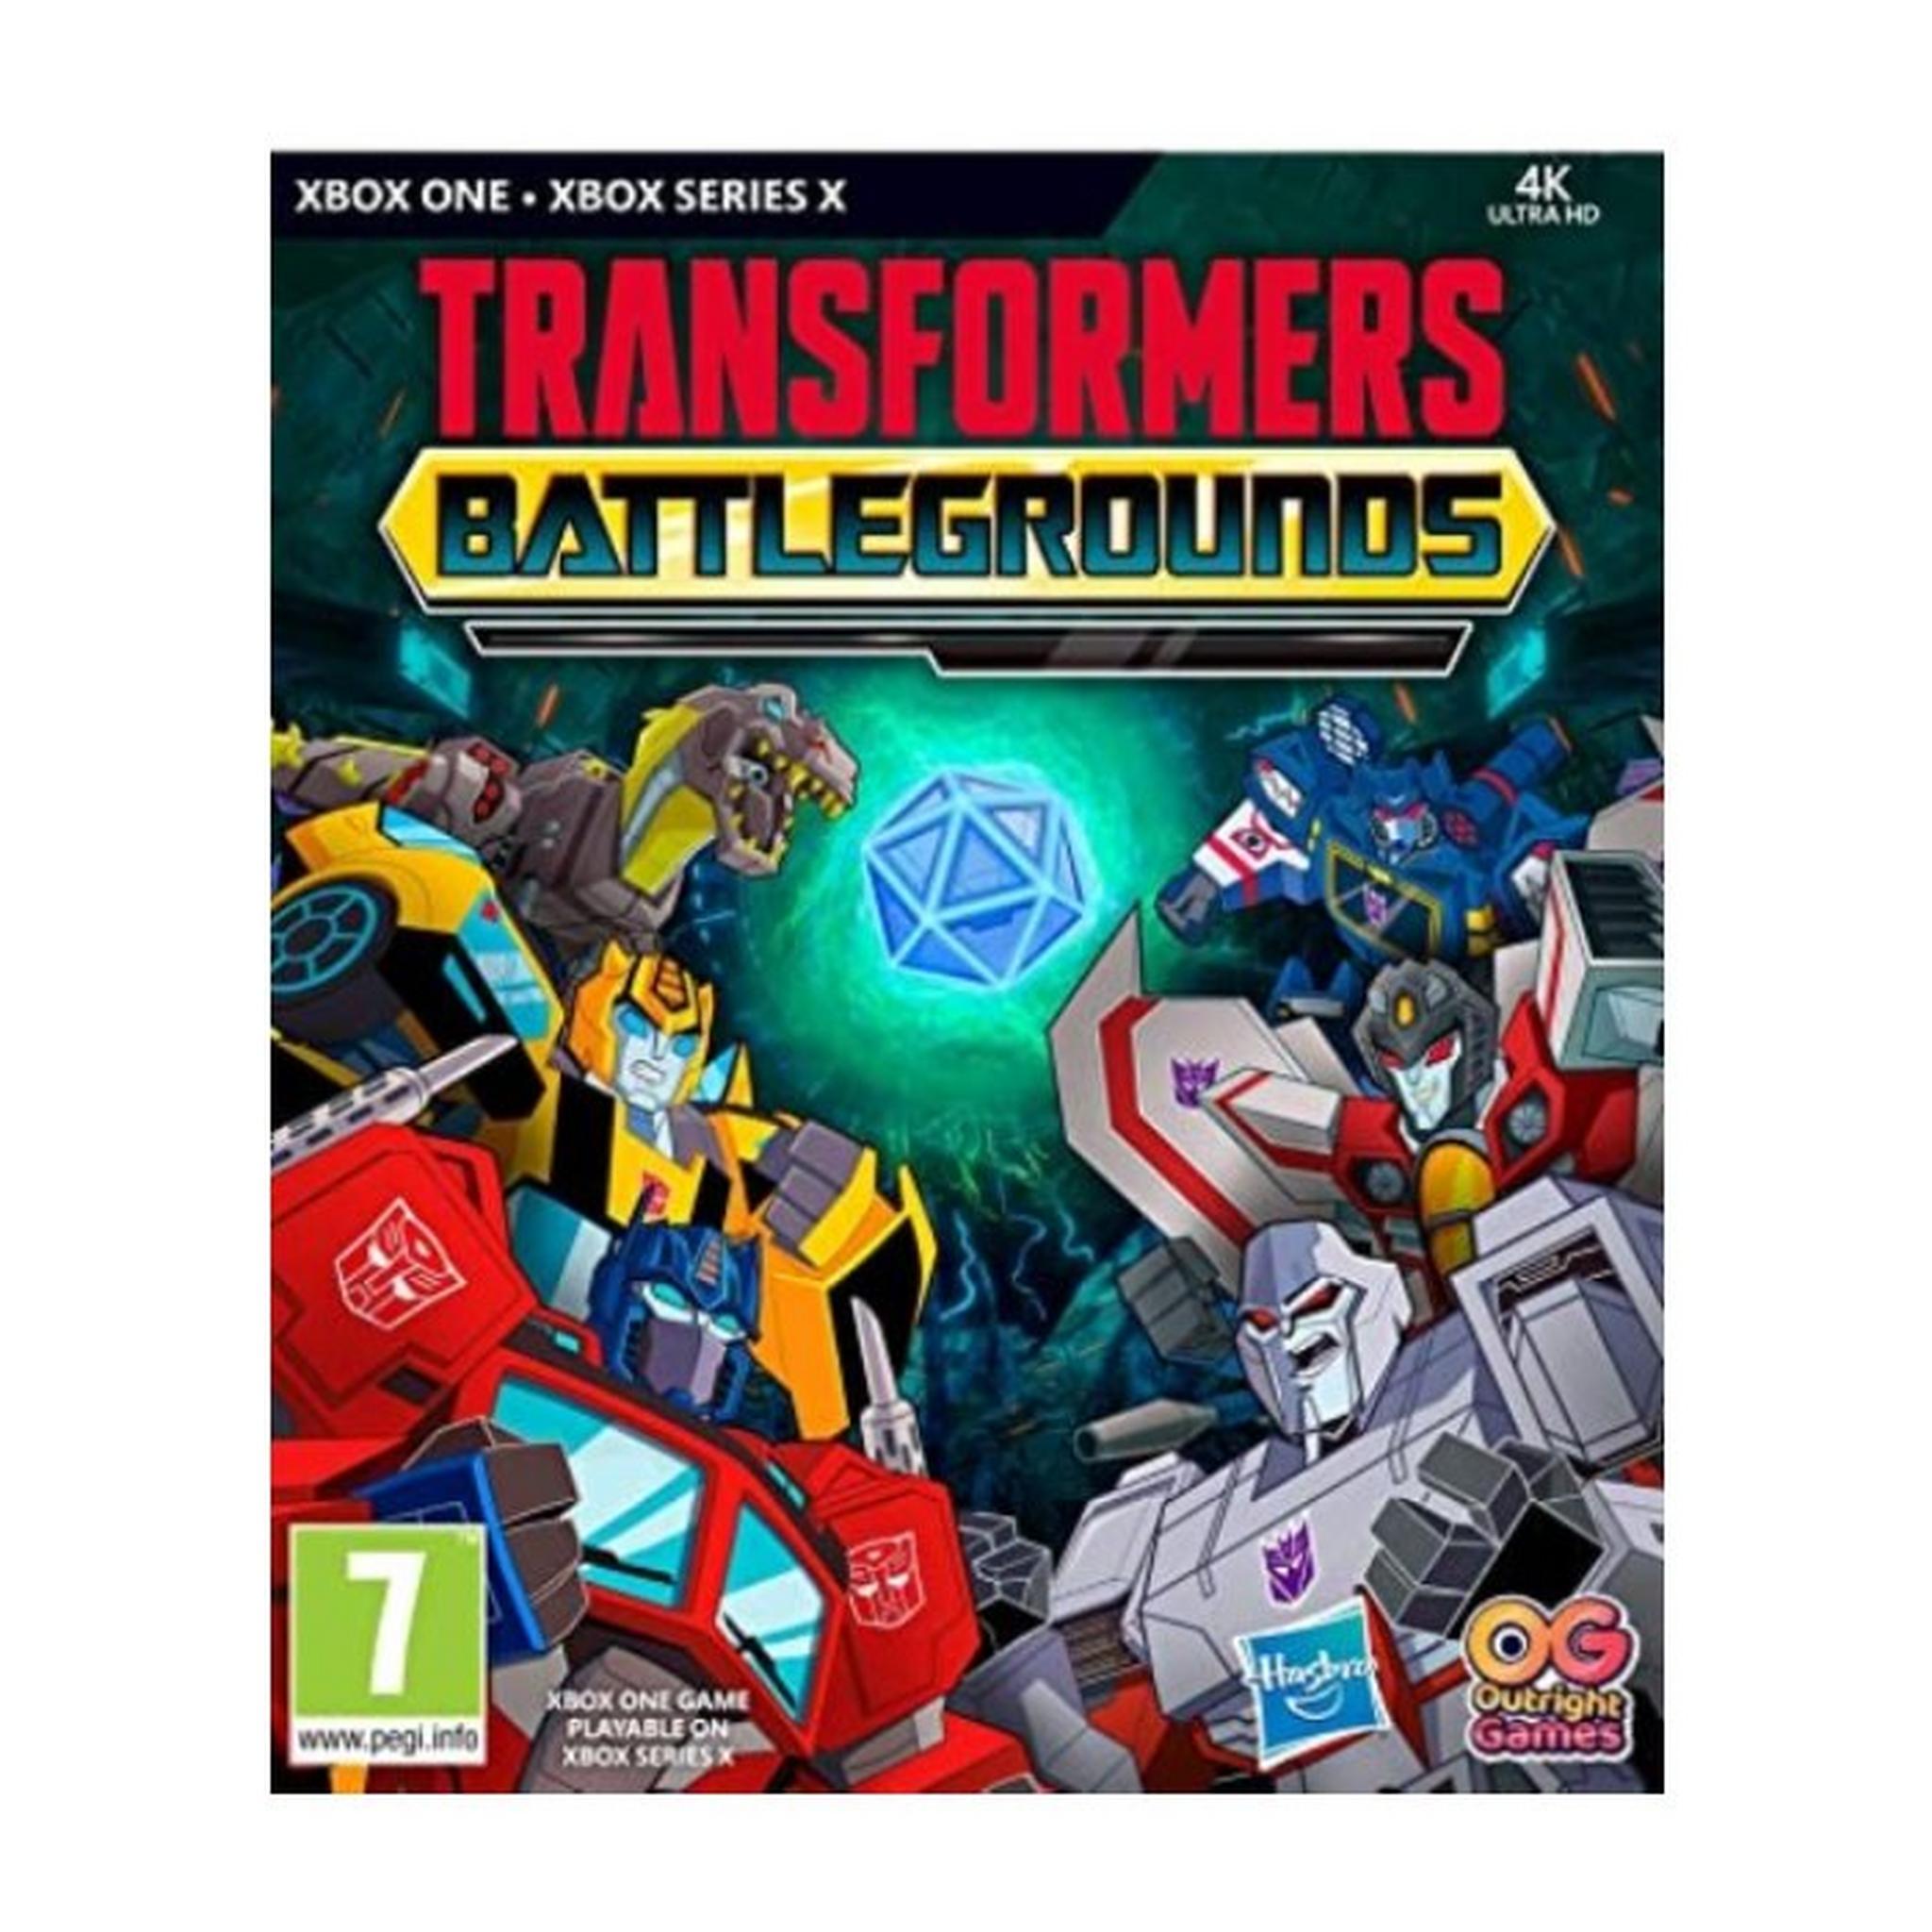 Transformers Battlegrounds - Xbox One Game